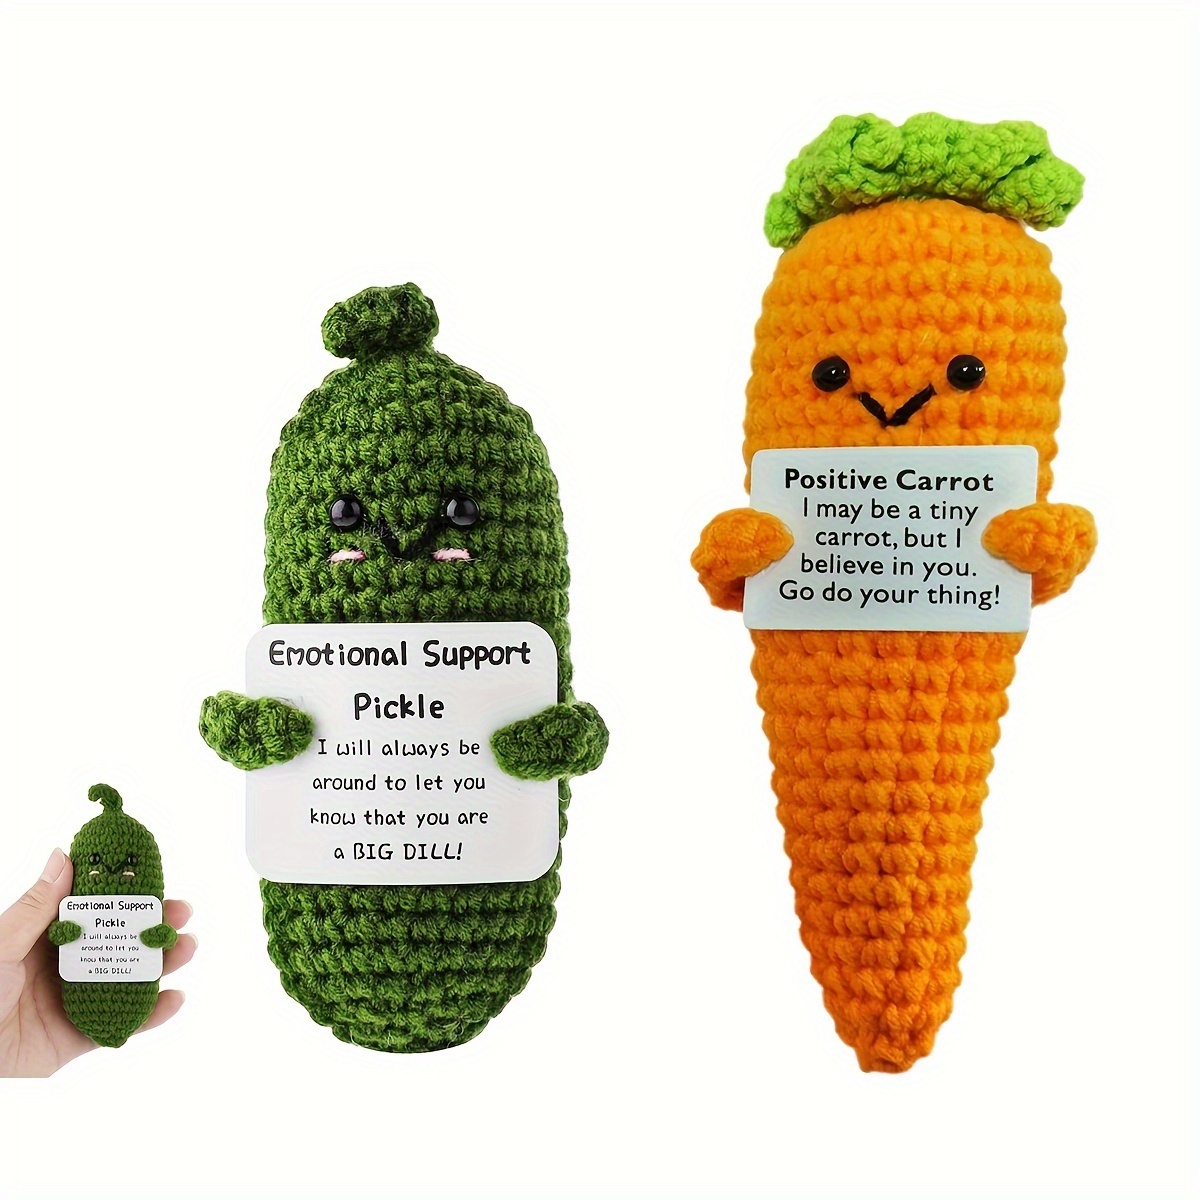 

Fun And Positive Cucumber Carrots, Hand-knitted Cute Dolls, Can Be Used As Happy Gifts, Easter Gifts, Birthday Gifts, Encouraging Gifts Exchanged Between Friends, Party Decorations